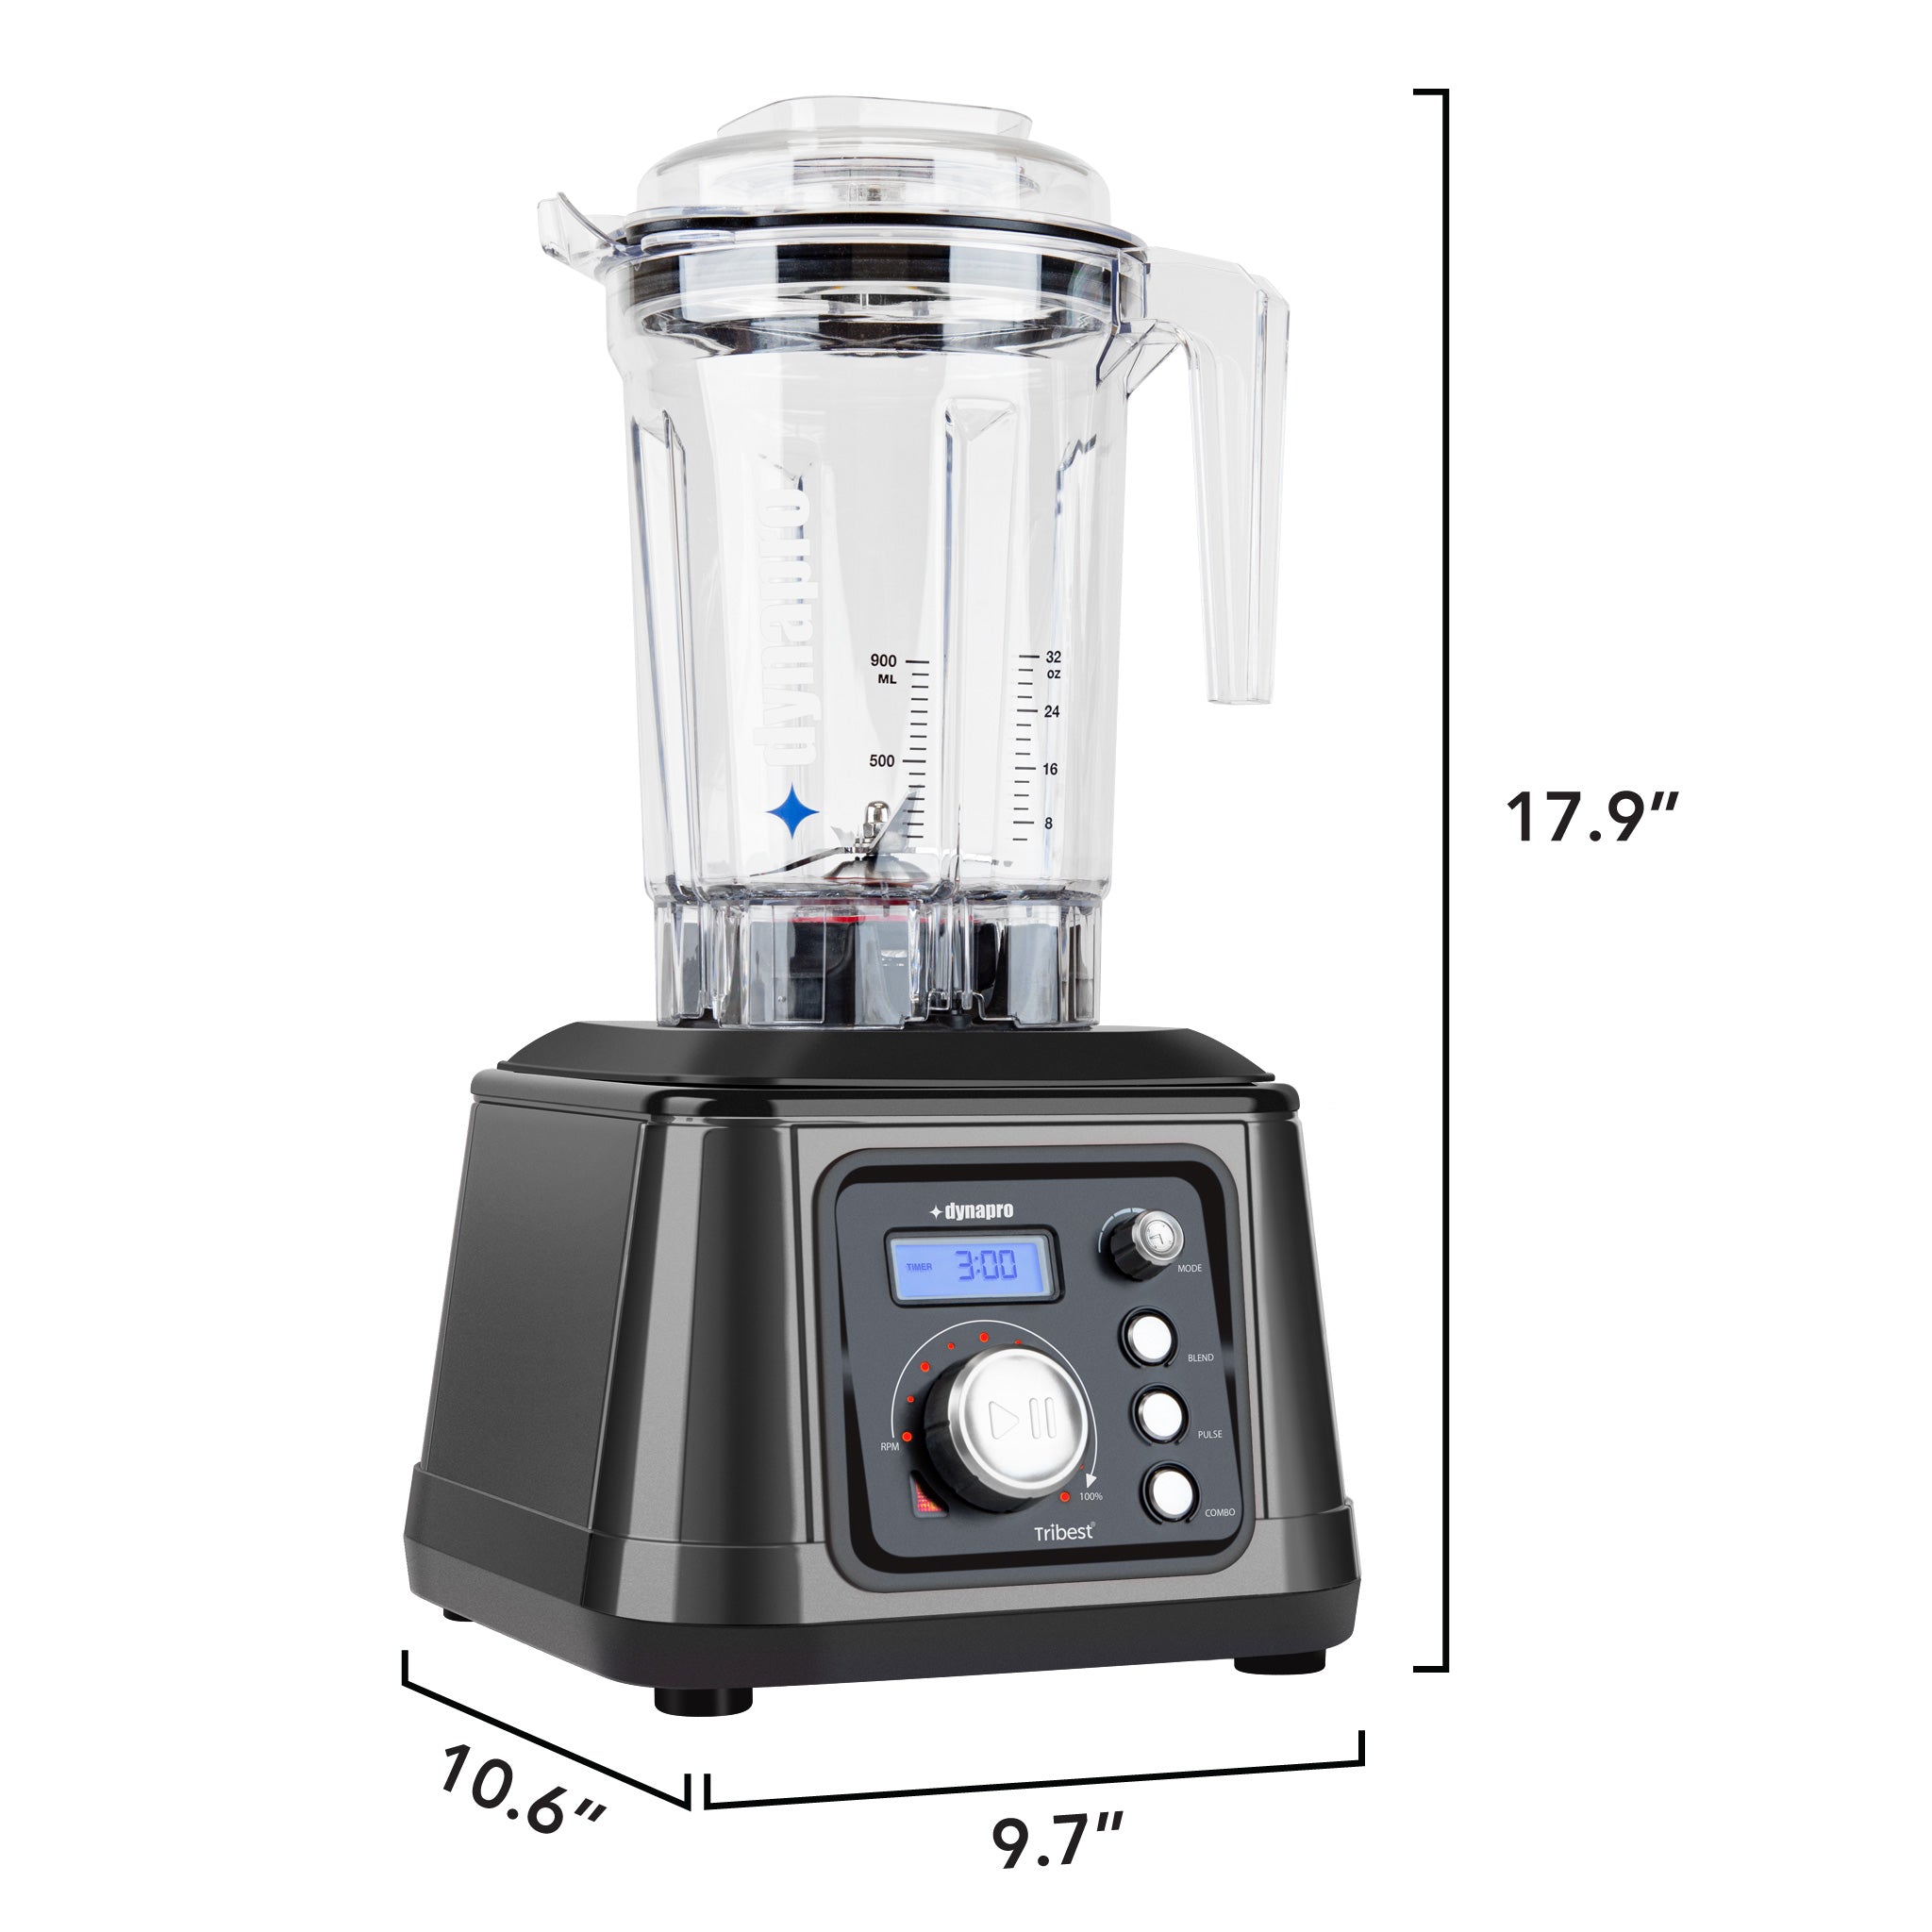 Dynapro® Commercial High-Speed Blender in Gray - 10.6